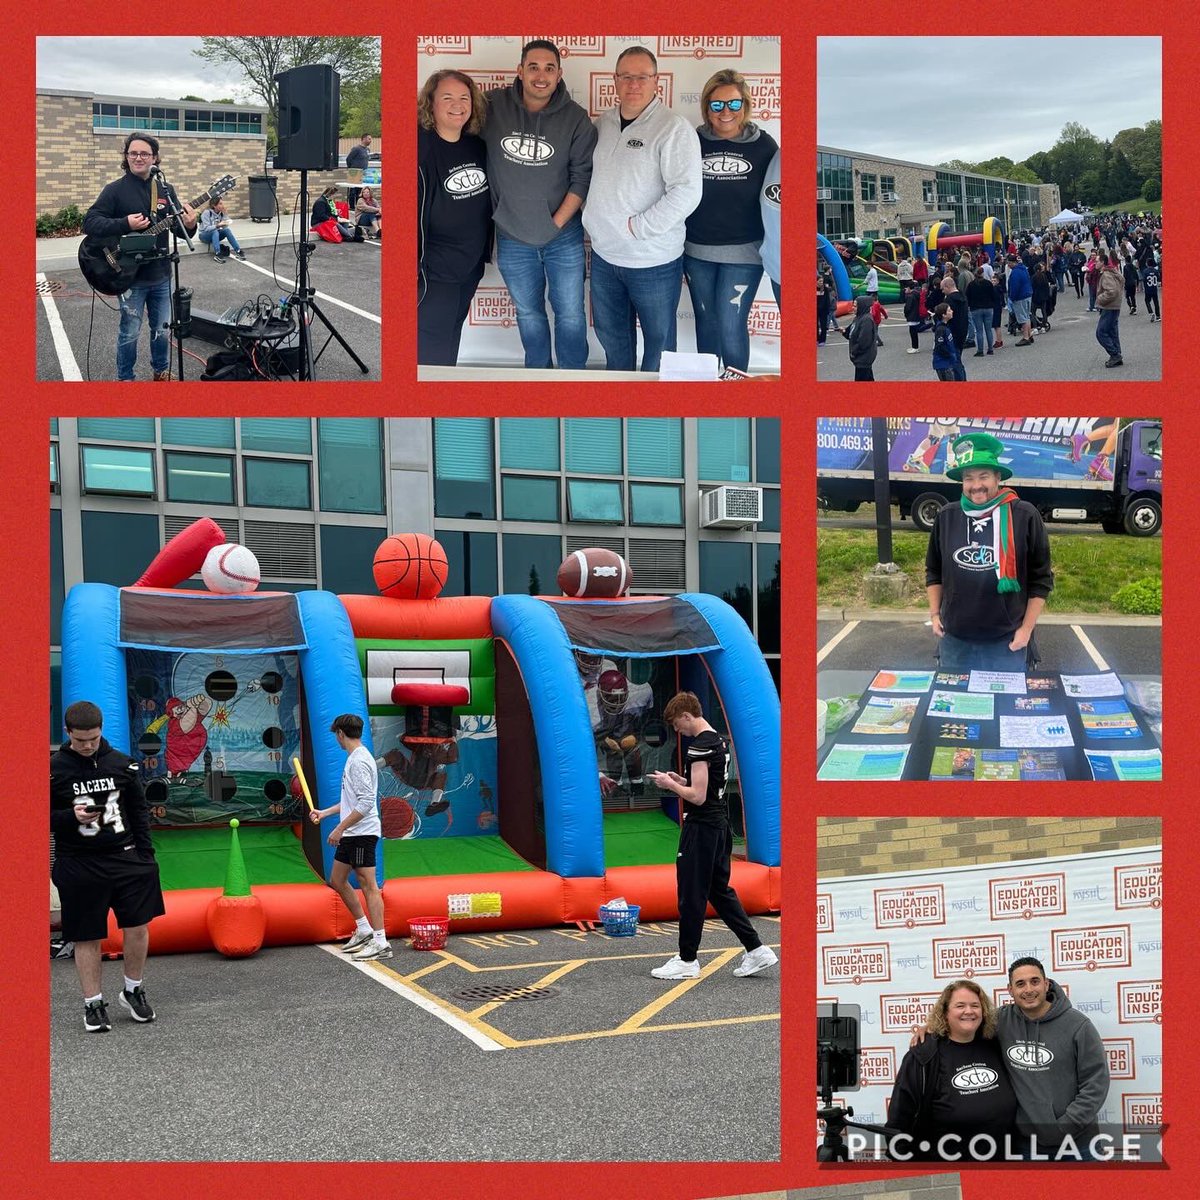 Thank you to everyone who came out to support this event! The SCTA is proud to be a part of the Sachem community! ❤️💛🖤 @nysut @aftunion @wearethescta @sachemcsd #community